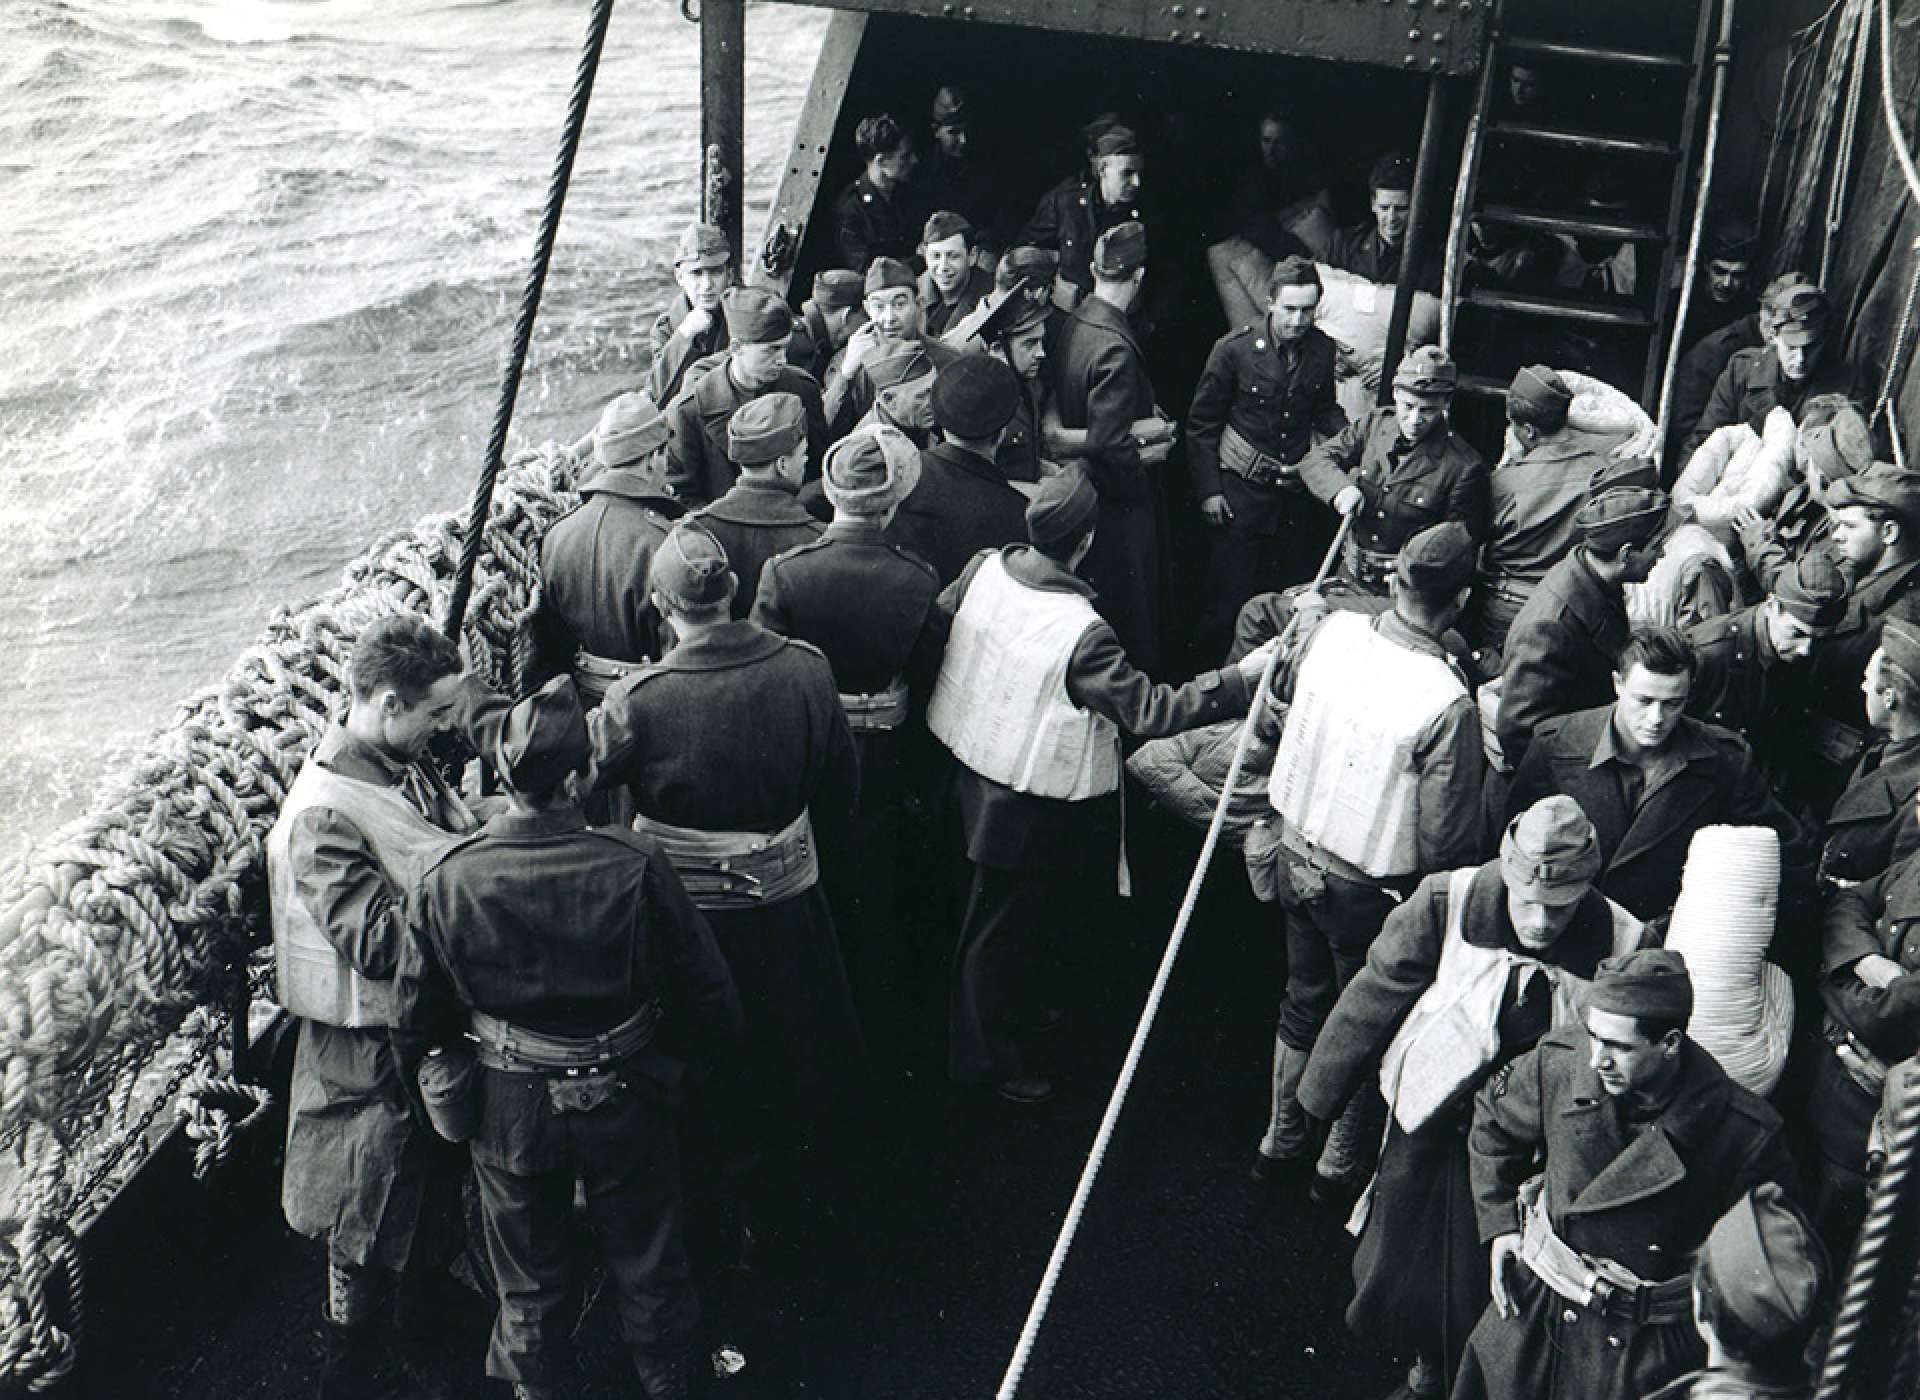 soldiers of the 34th Infantry Division practiced lifeboat drill while enroute to Northern Ireland